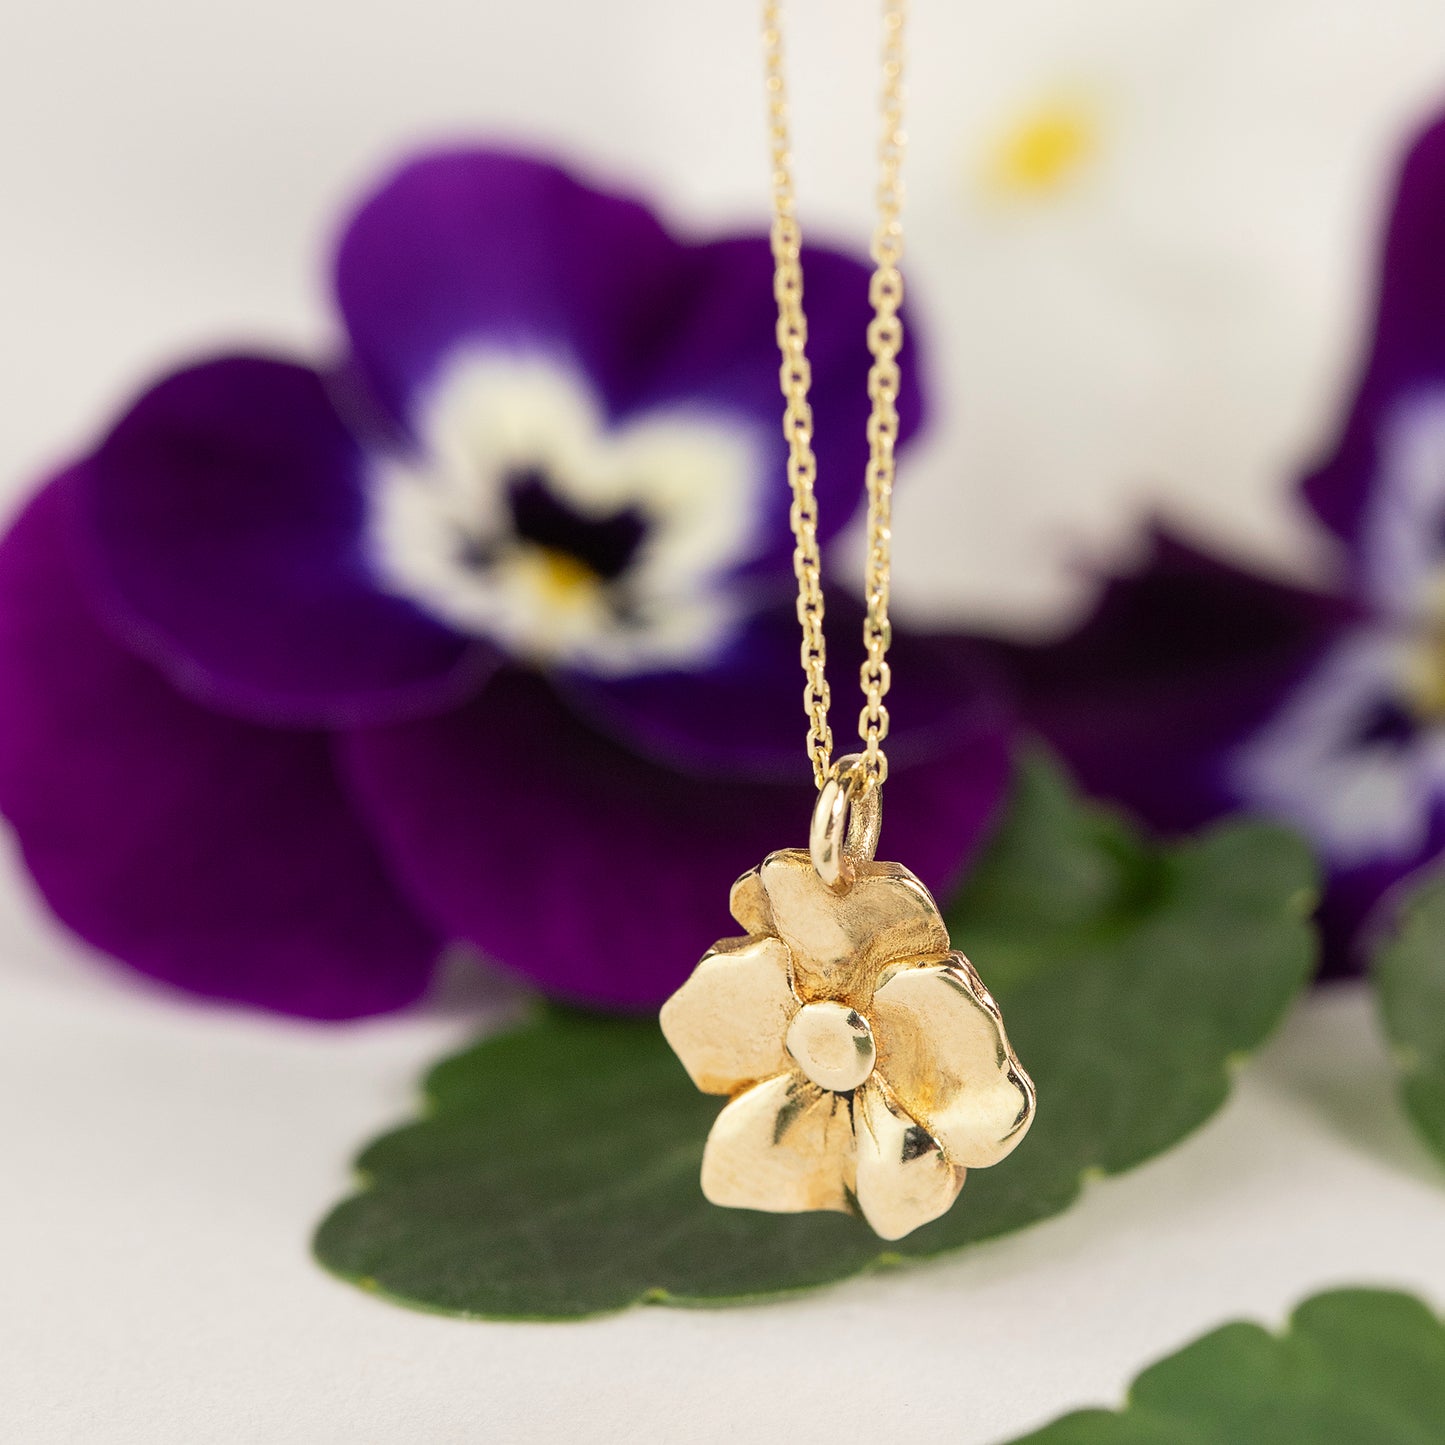 50th Anniversary Gift - Violet Flower Necklace - 9kt Gold